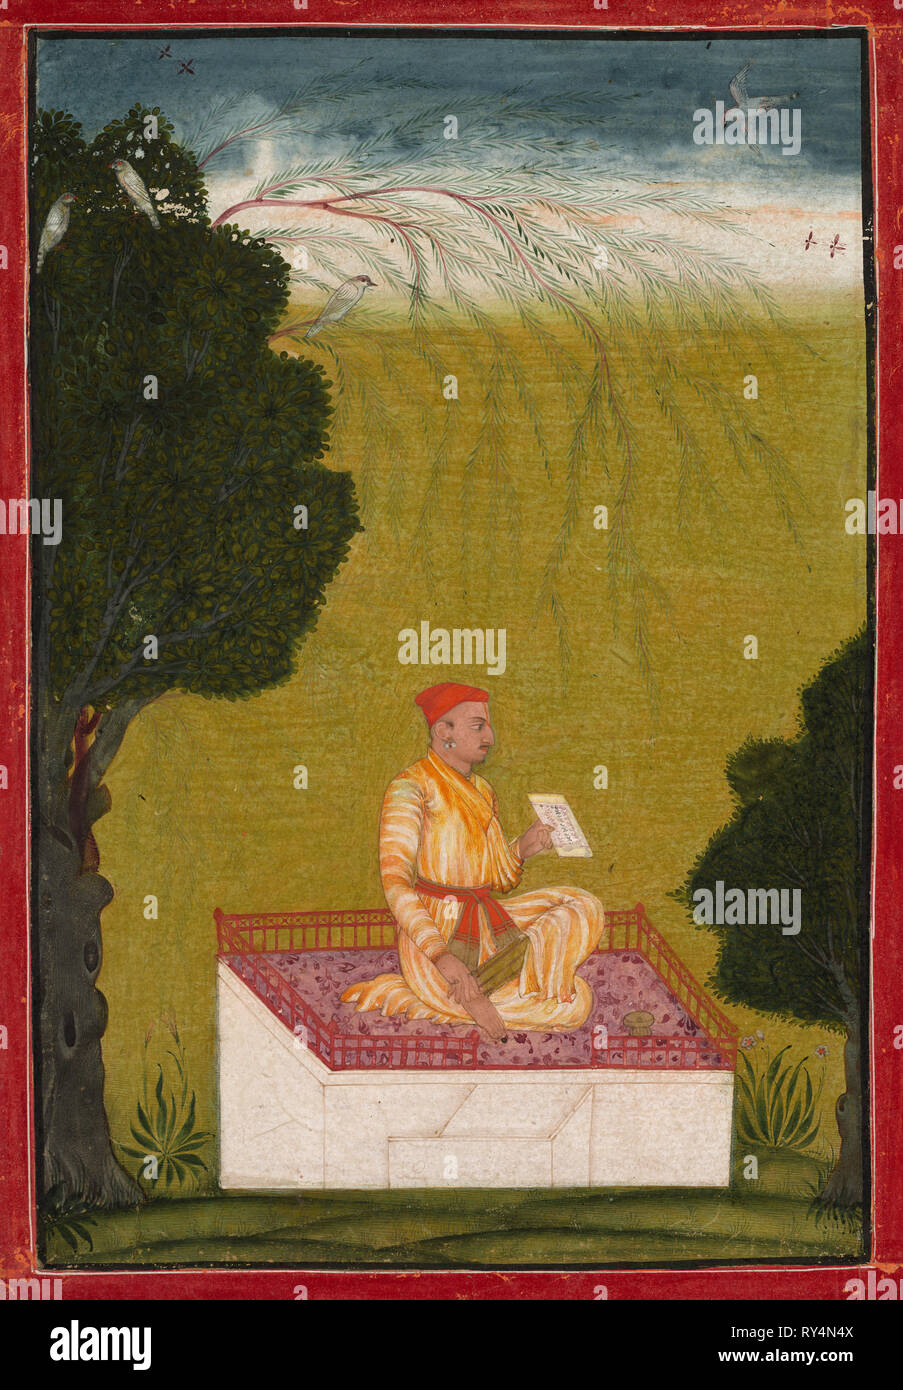 Raja Dalip Singh of Guler on a Dias, c. 1720. India, Himachal Pradesh, Bilaspur. Opaque watercolor and gold on paper; image: 22.7 x 15.3 cm (8 15/16 x 6 in.); overall: 27.1 x 19.8 cm (10 11/16 x 7 13/16 in Stock Photo